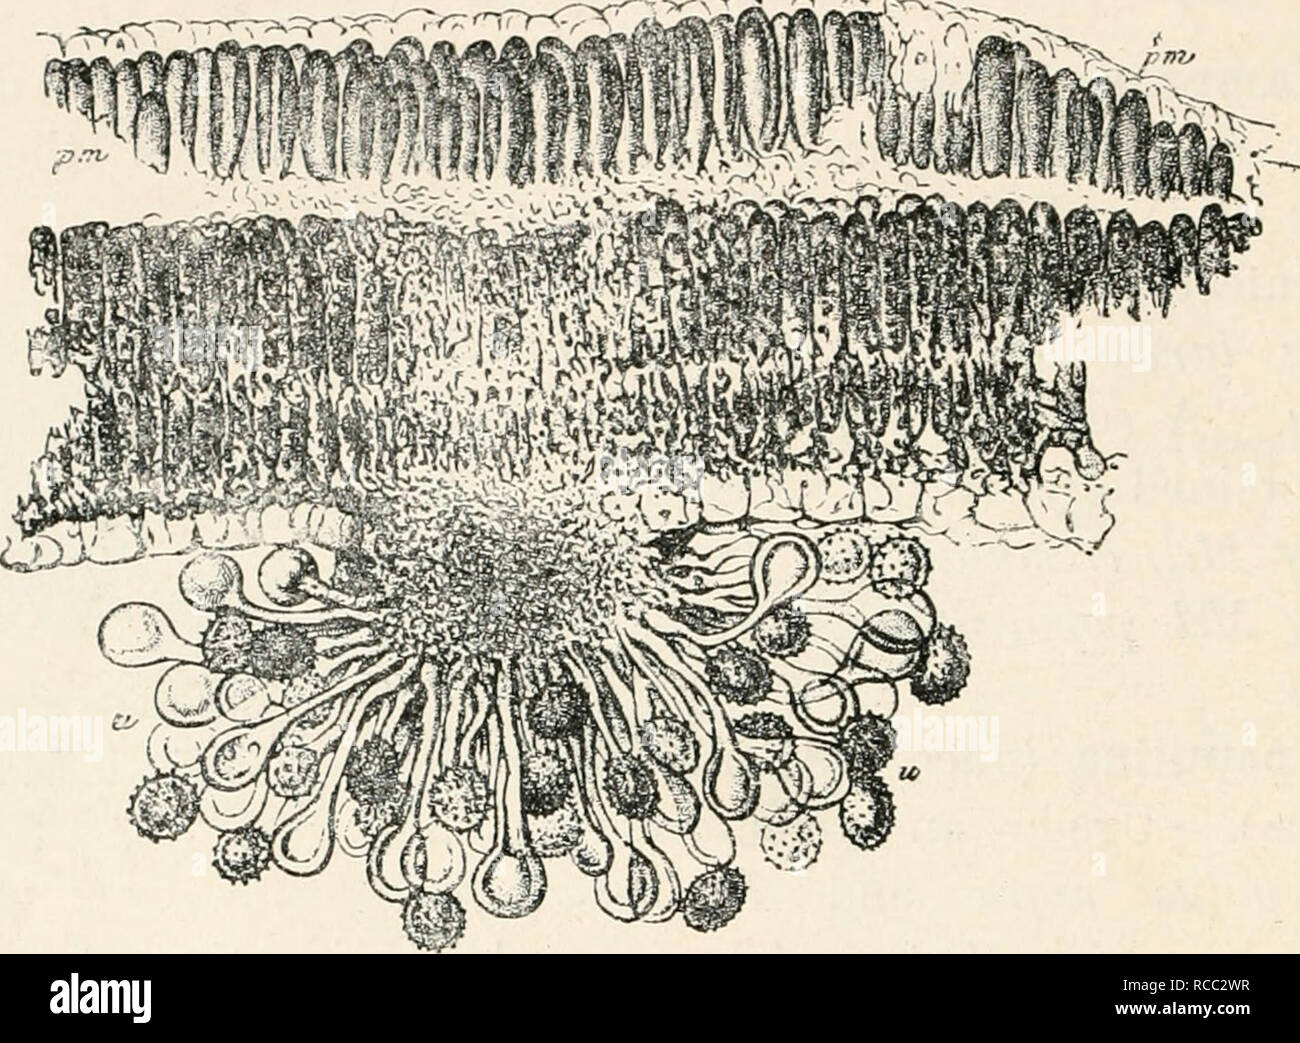 . Diseases of plants induced by cryptogamuc parasites; introduction to the study of pathogenic fungi, slime-fungi, bacteria, and algae. English ed. by William G. Smith. Plant diseases; Parasitic plants. 368 UREDINEAE. M. salicis-capreae (Pers.) (Britain and U.S. America). Uredo- and teleutosj)ores on leaves of Sali.:c Caprca and several other species. According to Rostrup, Cacoma cuonymi (Gmel.) is a stage of this.^ M. Hartigii Thiun.- {M. epitea Thiini.) (Britain and U.S. America). Uredo- and teleutospores on leaves of Salix prmnosa. S. dn^yhnoides, S. viminalis, etc. Rostrup regards C. ribes Stock Photo